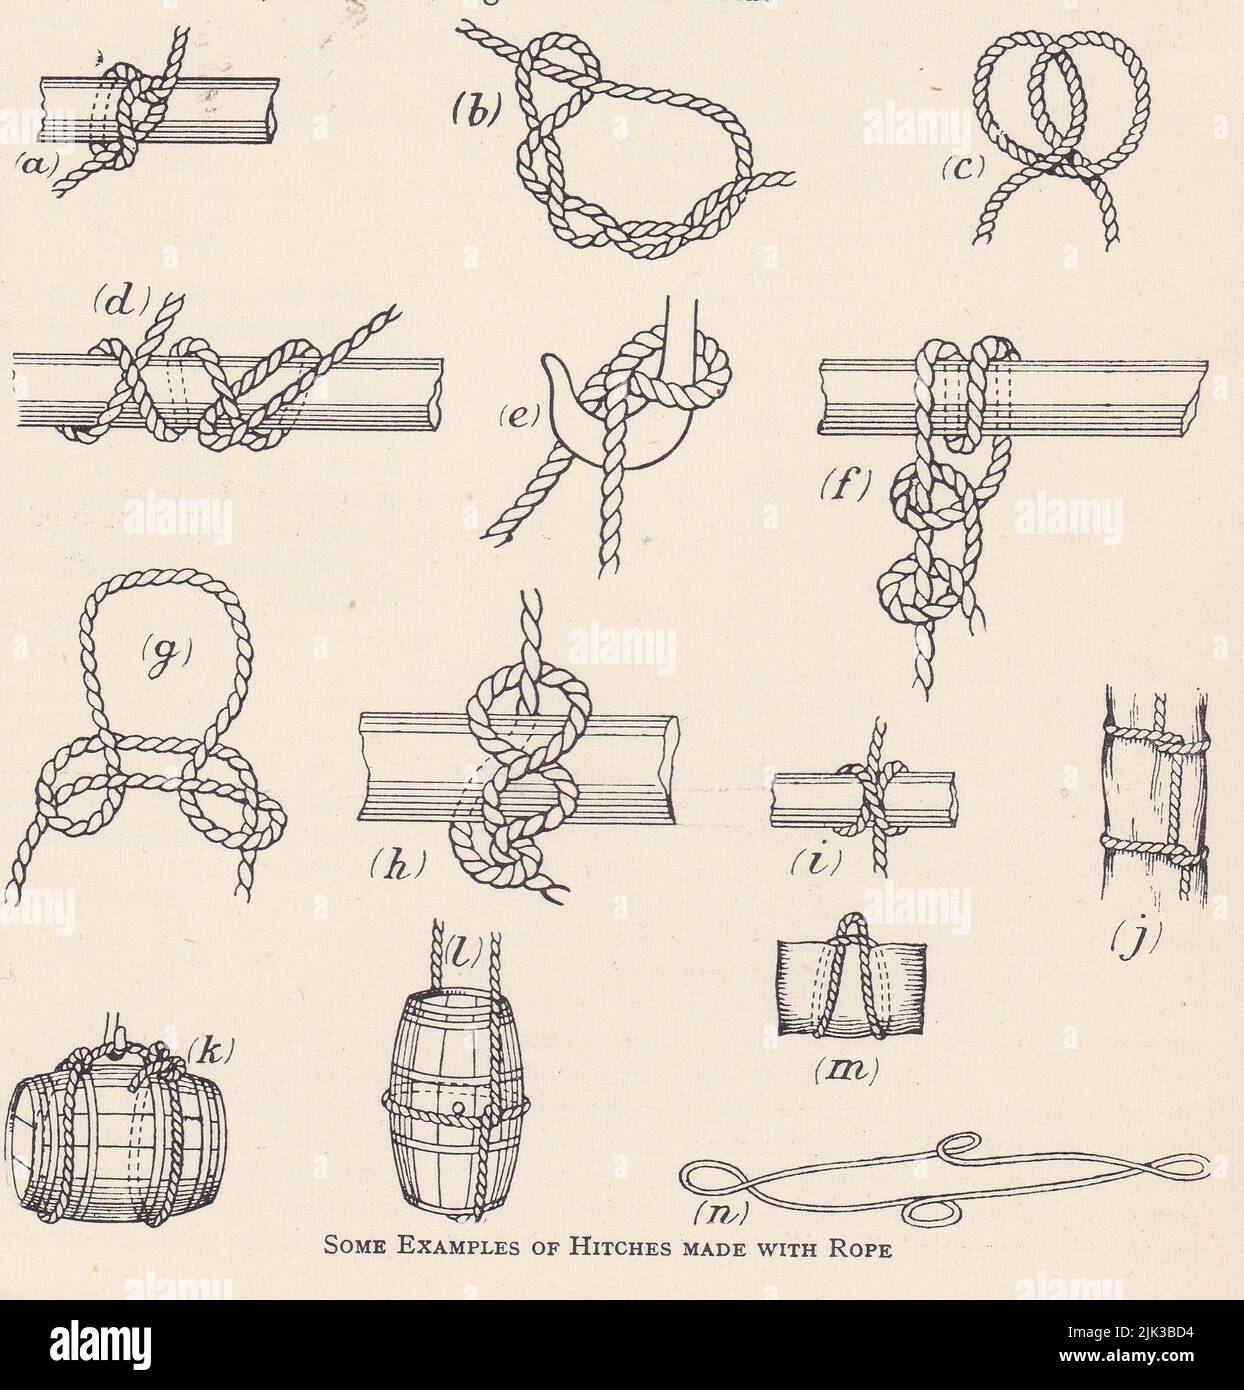 Vintage diagrams of hitches made with rope. Stock Photo